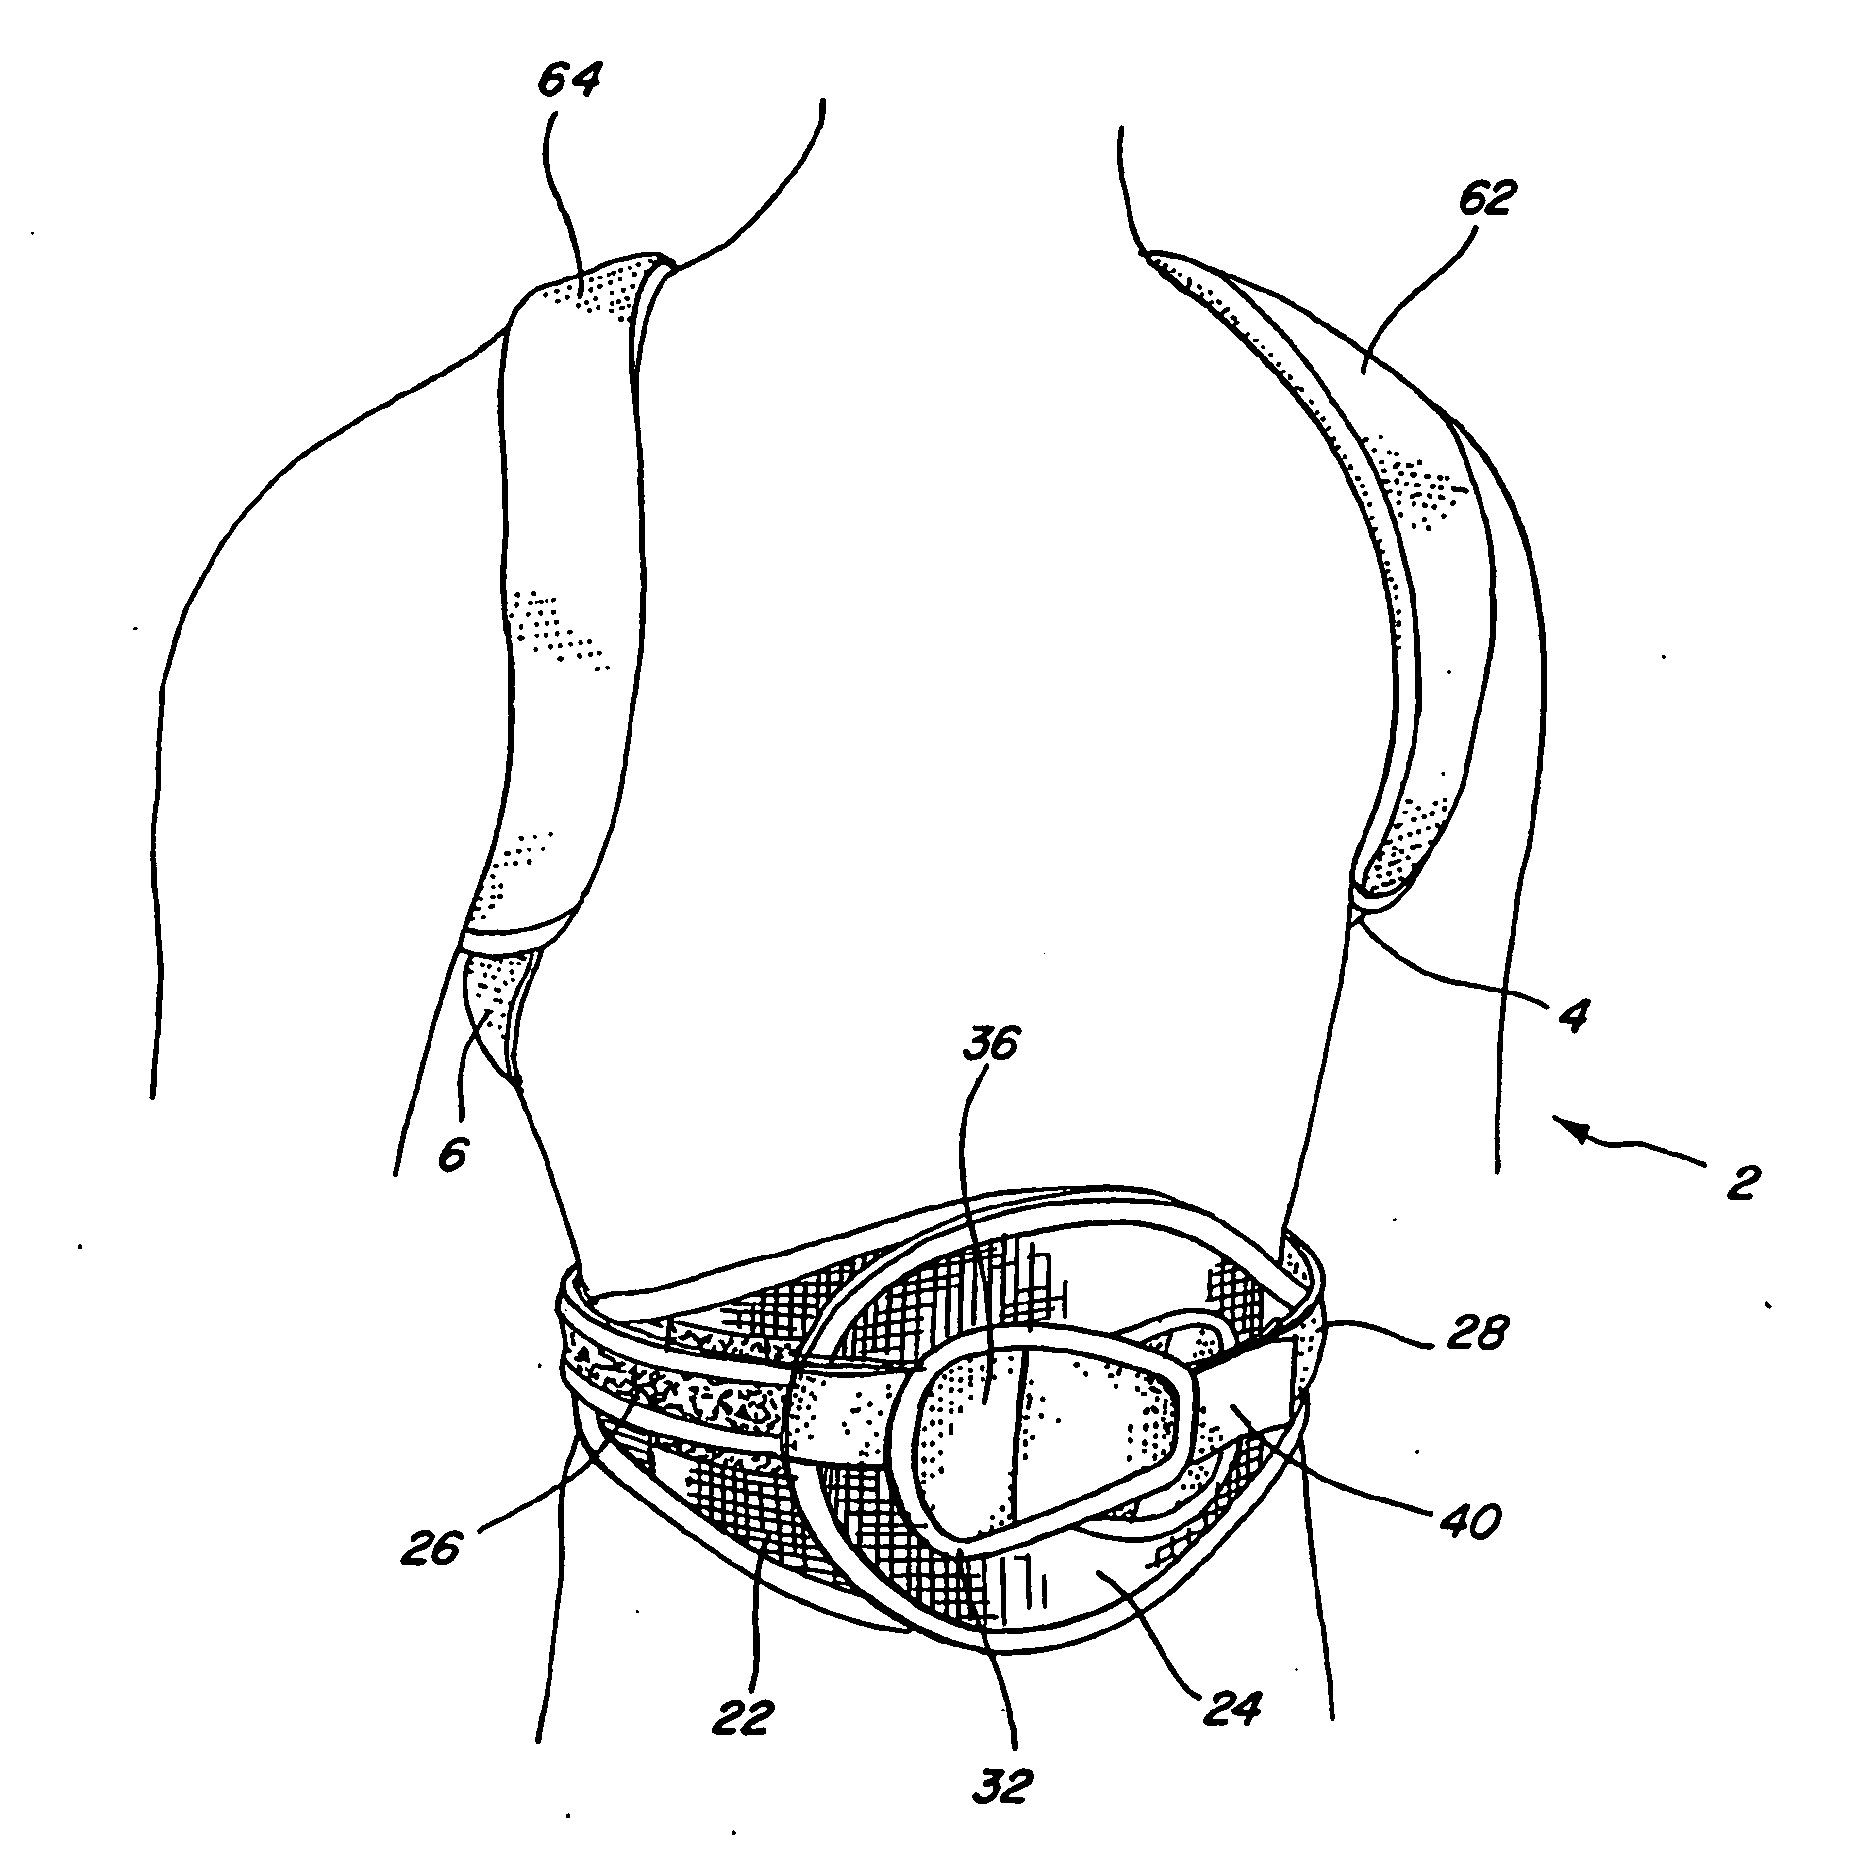 Adjustable posterior spinal orthosis